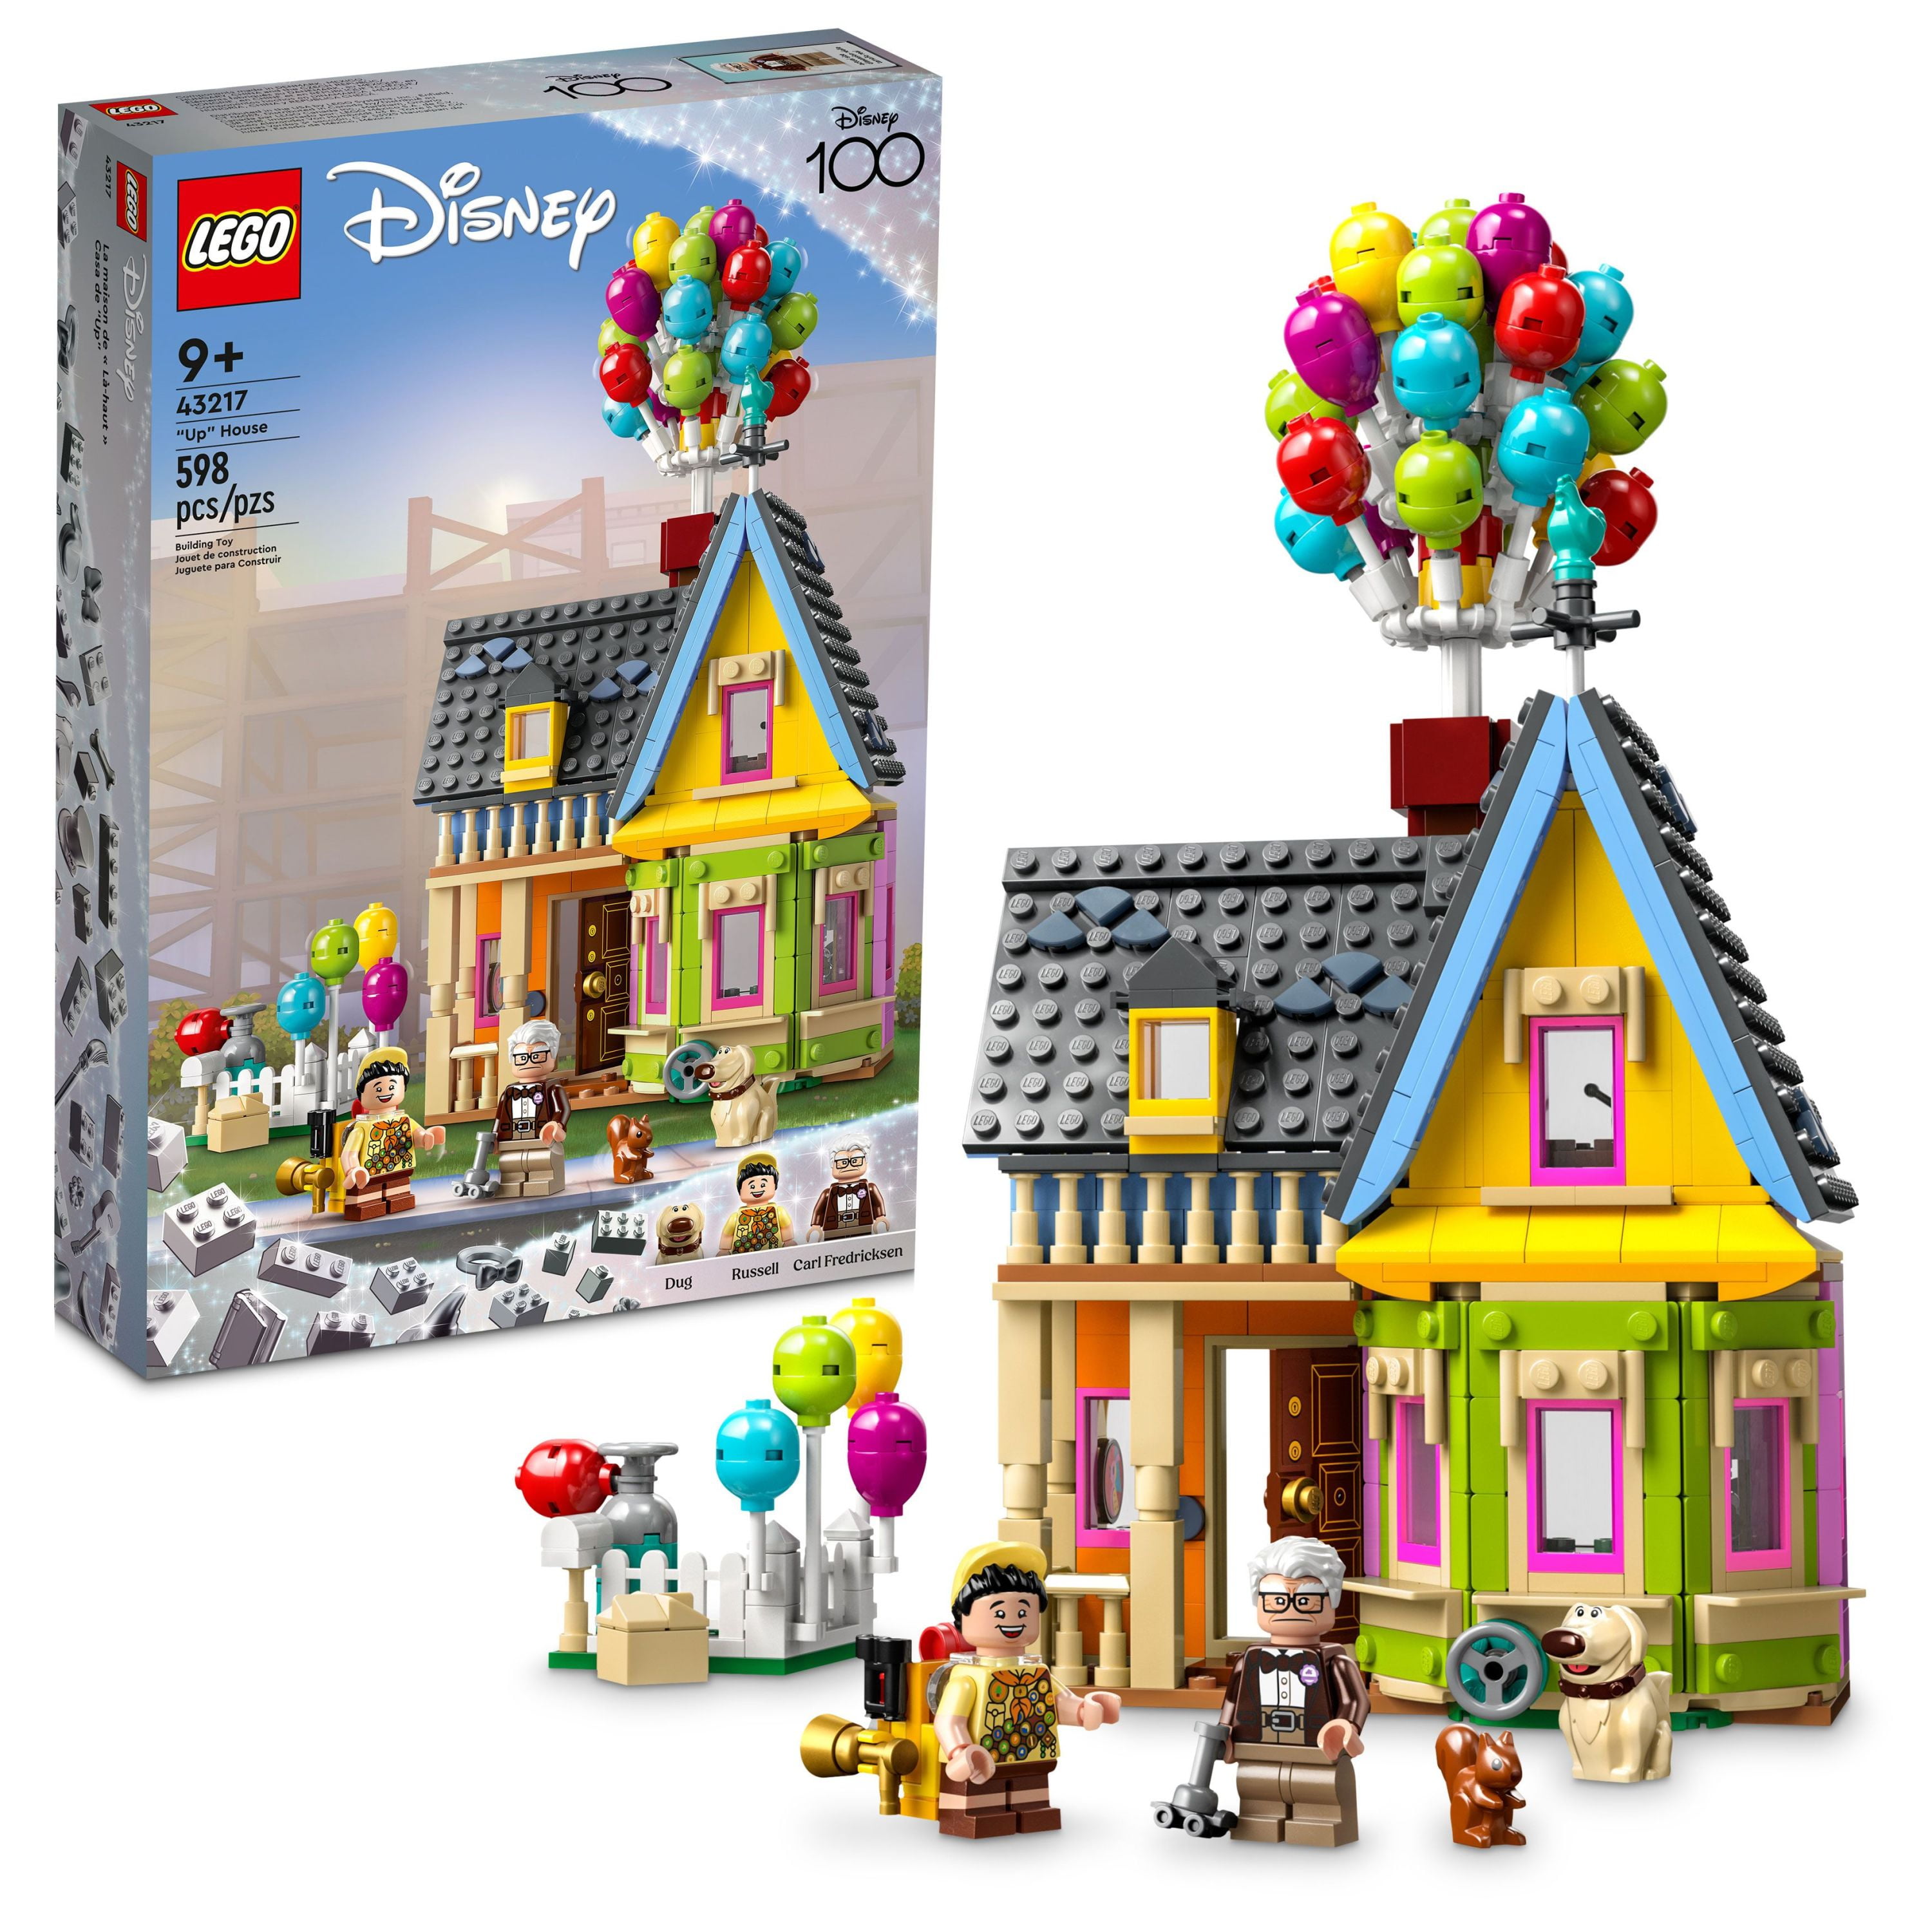 Ontaarden Cordelia verliezen LEGO Disney and Pixar 'Up' House 43217 Disney 100 Celebration Building Toy  Set for Kids and Movie Fans Ages 9+, A Fun Gift for Disney Fans and Anyone  Who Loves Creative Play - Walmart.com